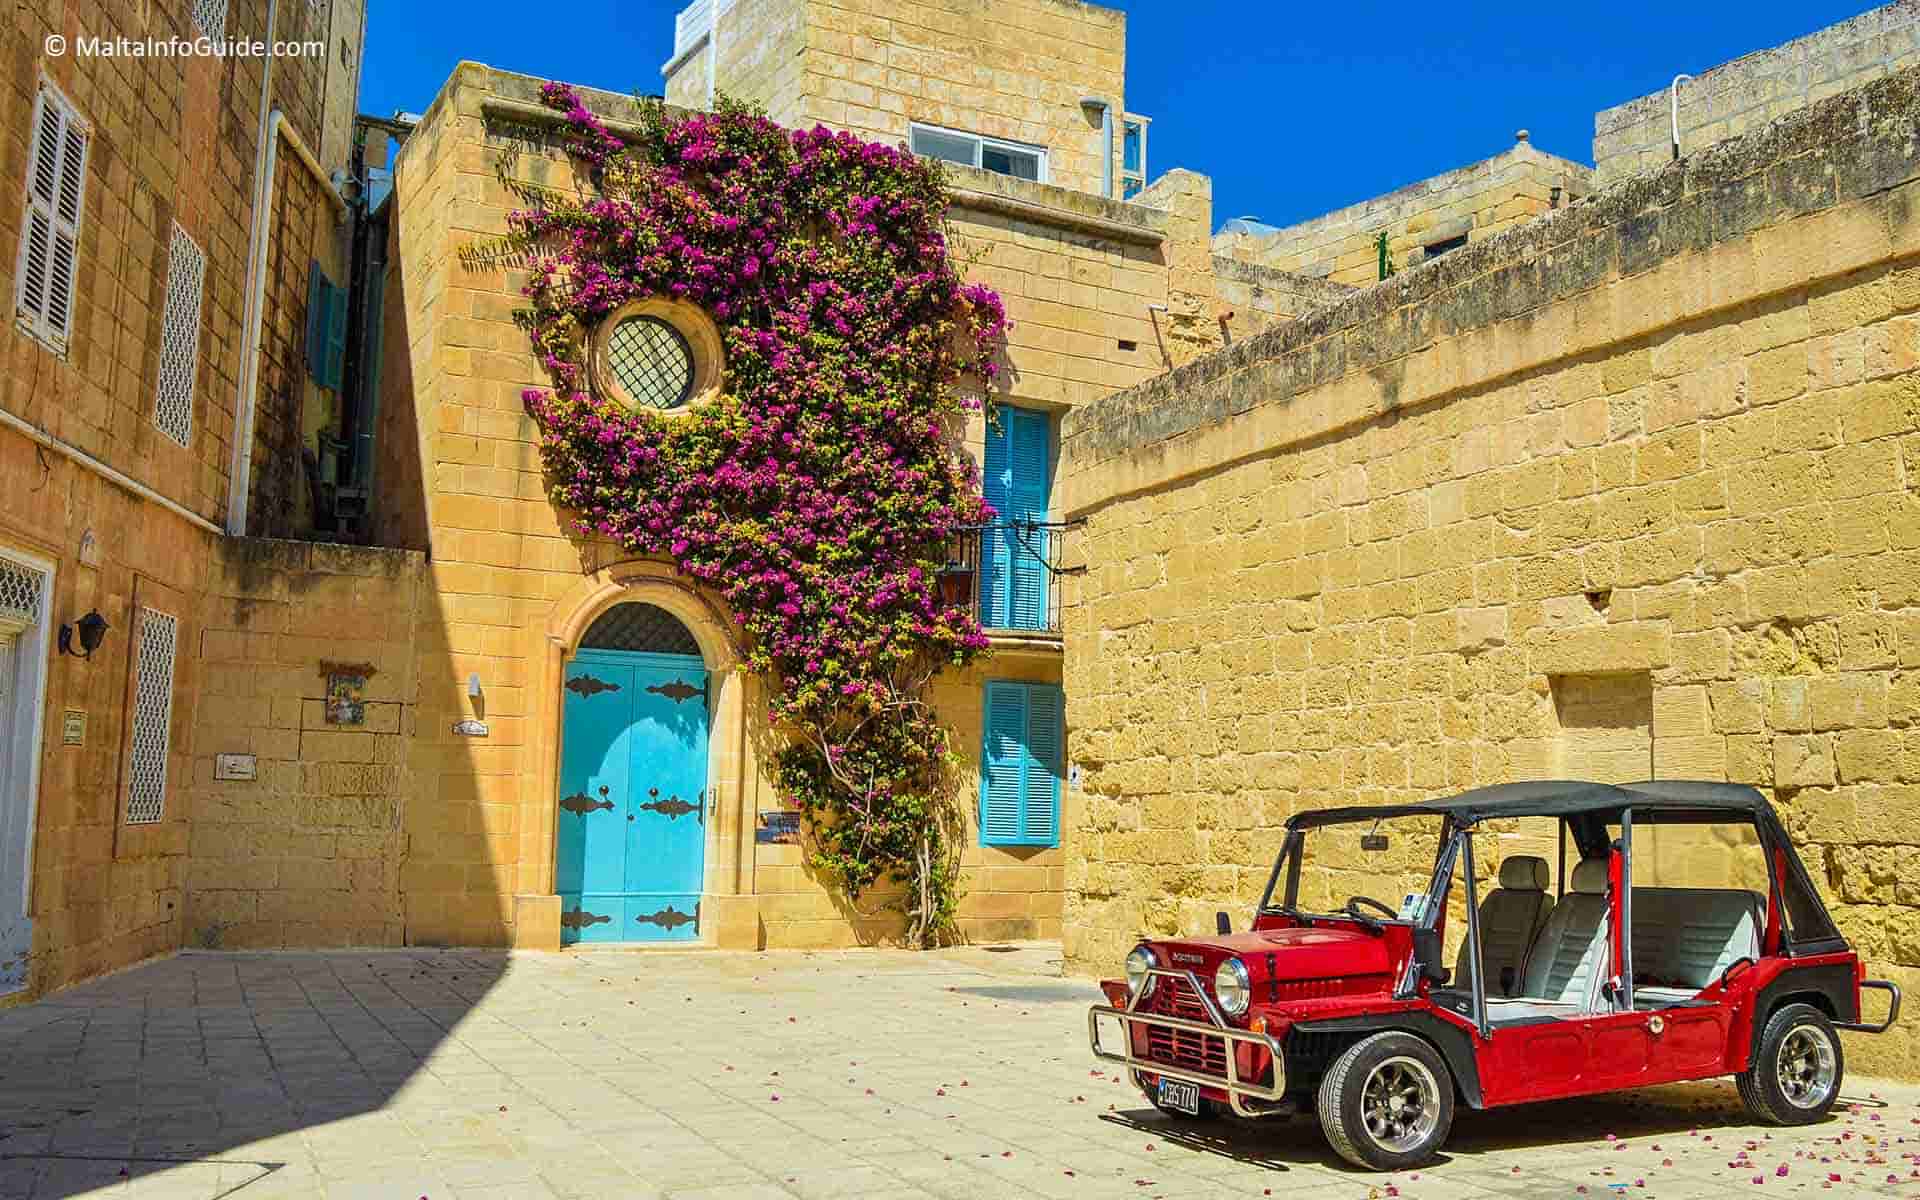 A Bougainvillea growing on the facade of an old house in Mdina.